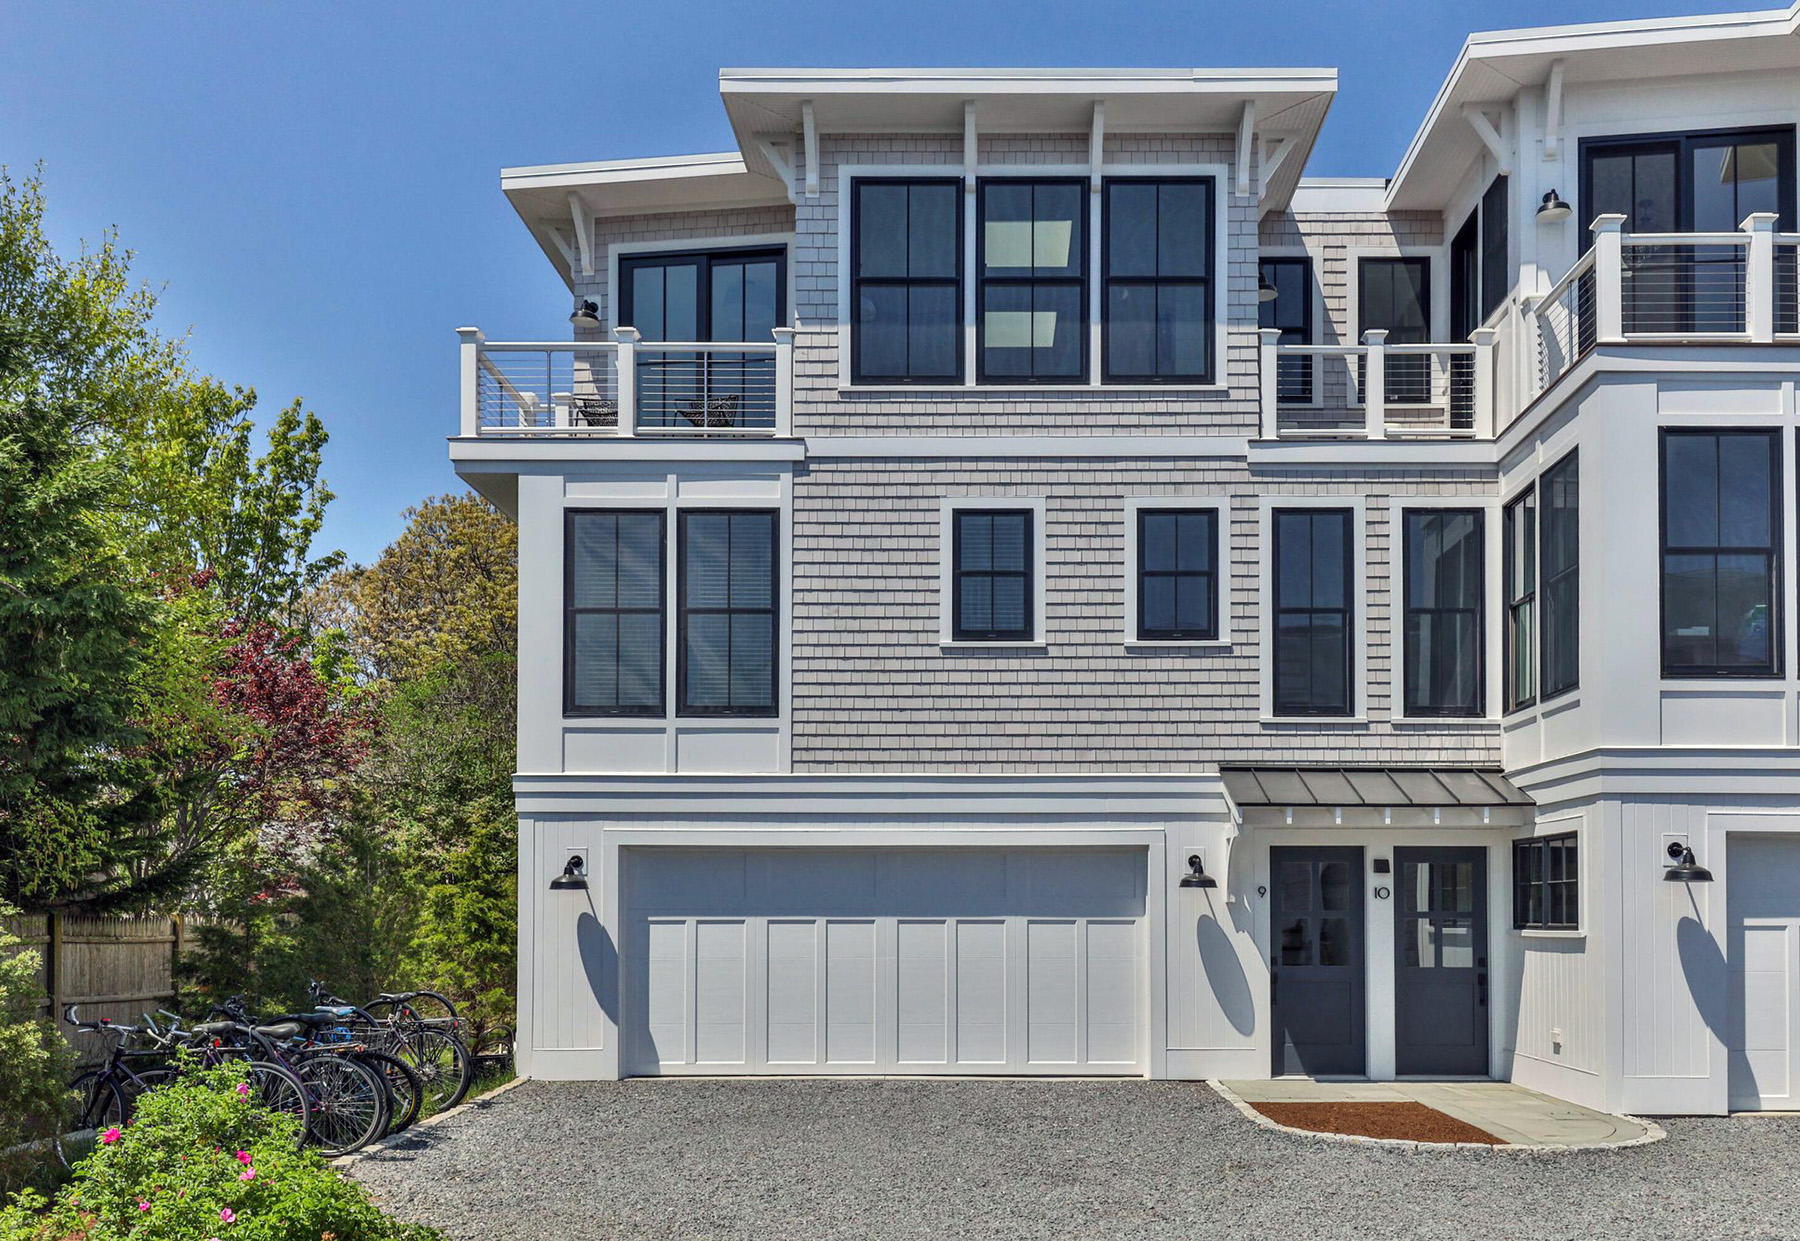 Beautiful design featuring light gray shake siding with white trim and black windows. Lots of Azek work.